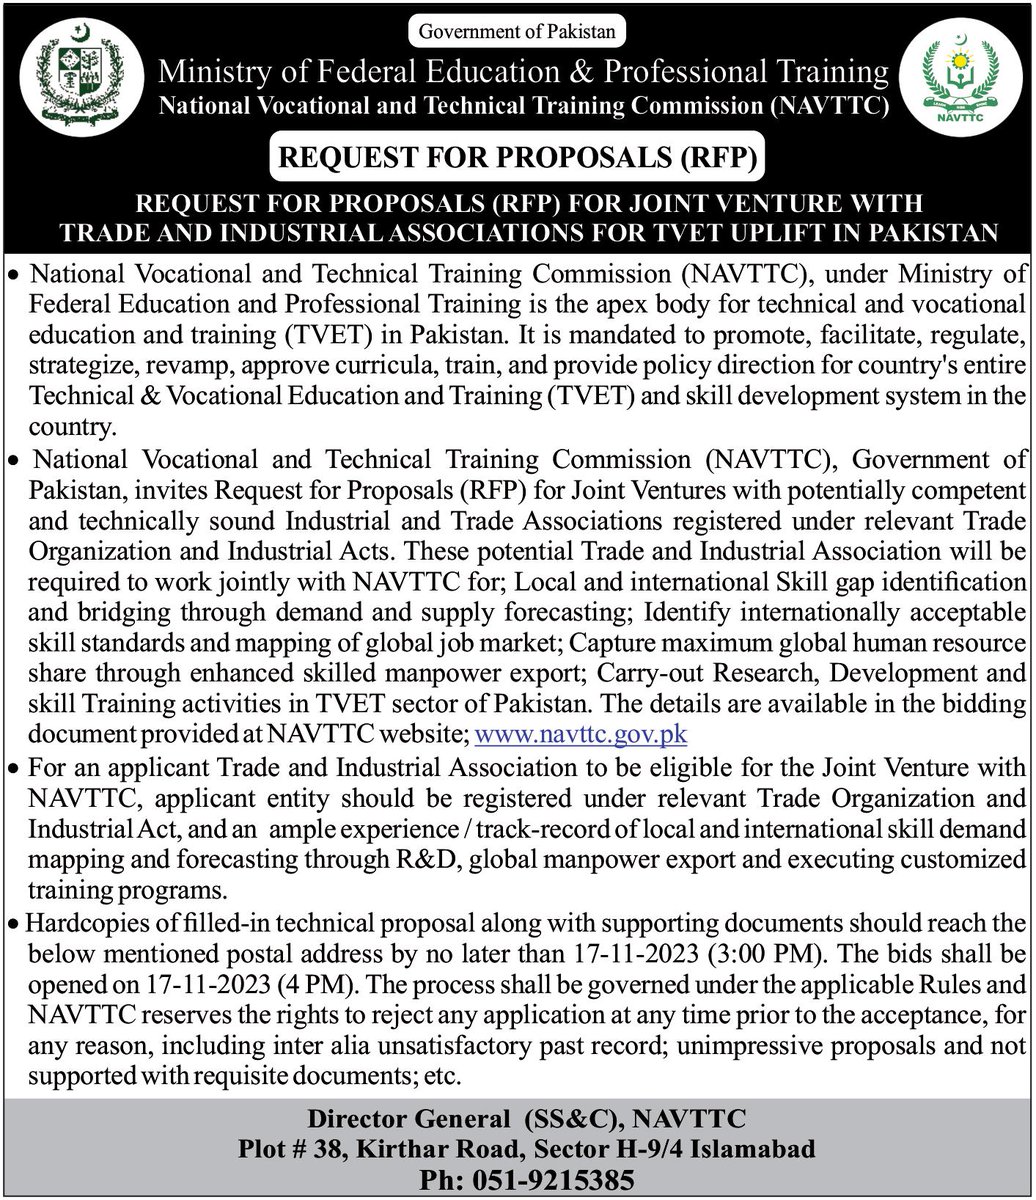 Request for Proposals (RFP) for Joint Venture with Trade and Industrial Associations for TVET Uplift in Pakistan
#TVET #Pakistan #jointventure